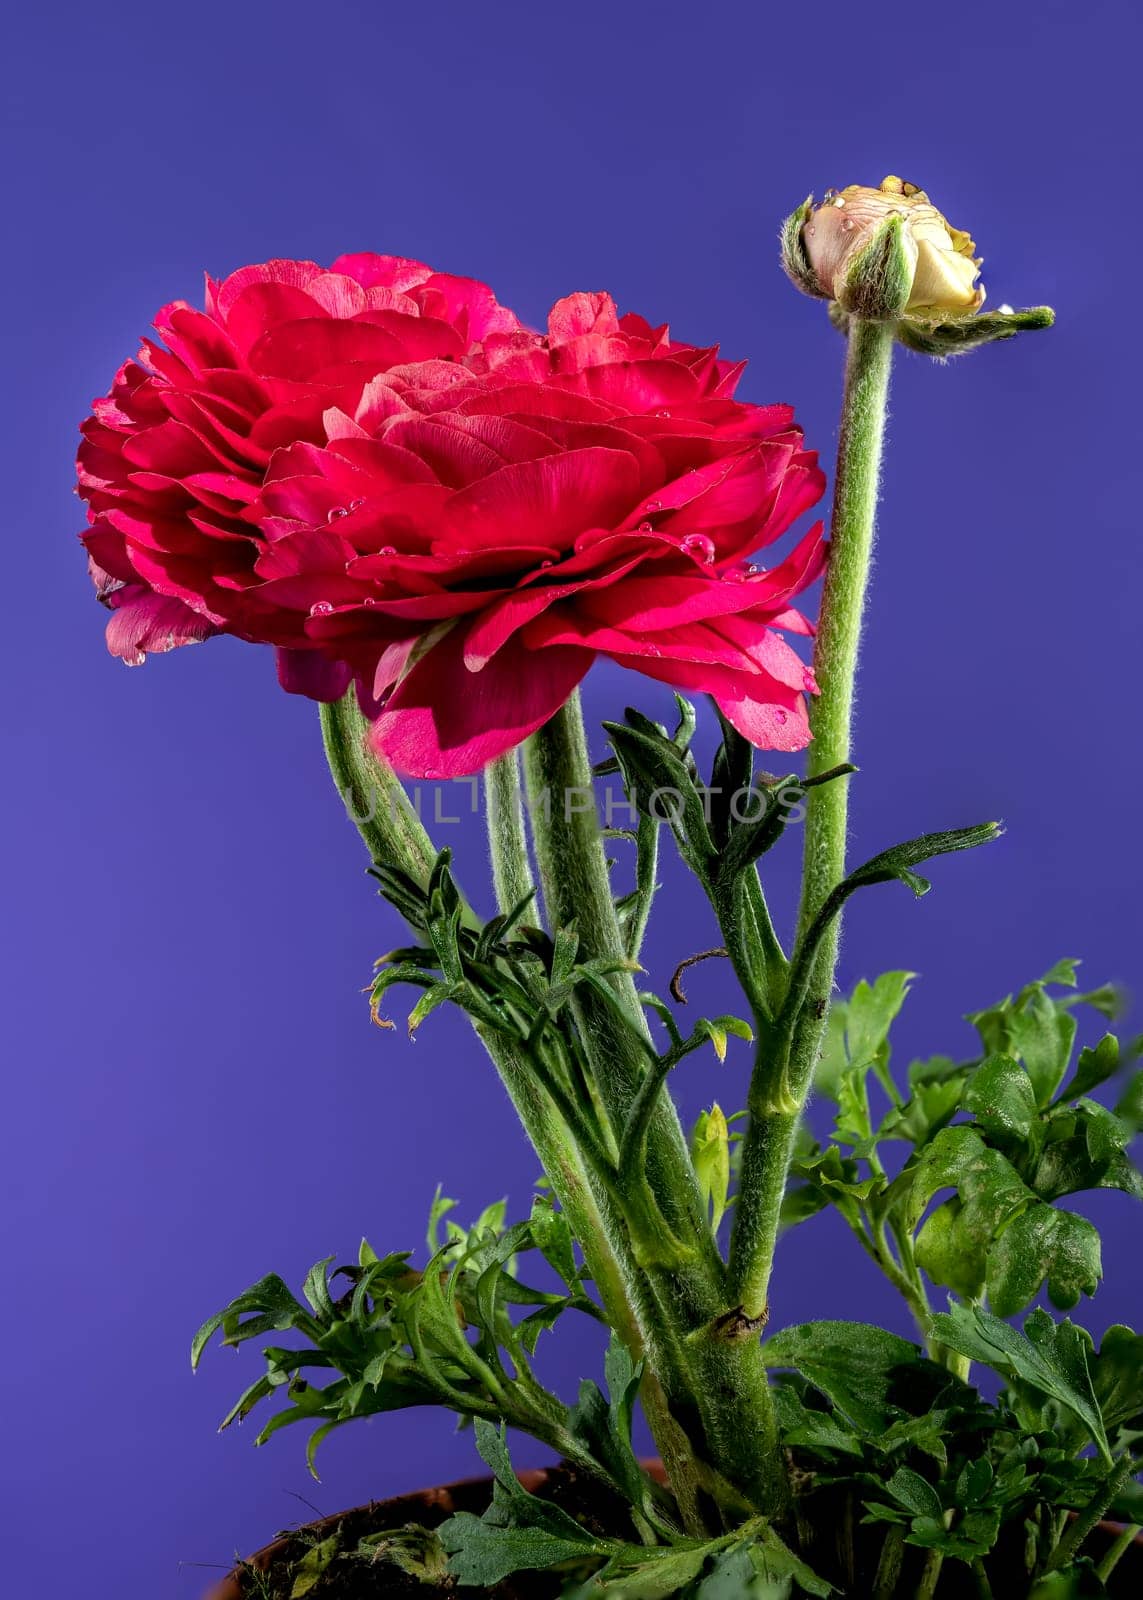 Red ranunculus flower on a blue background by Multipedia